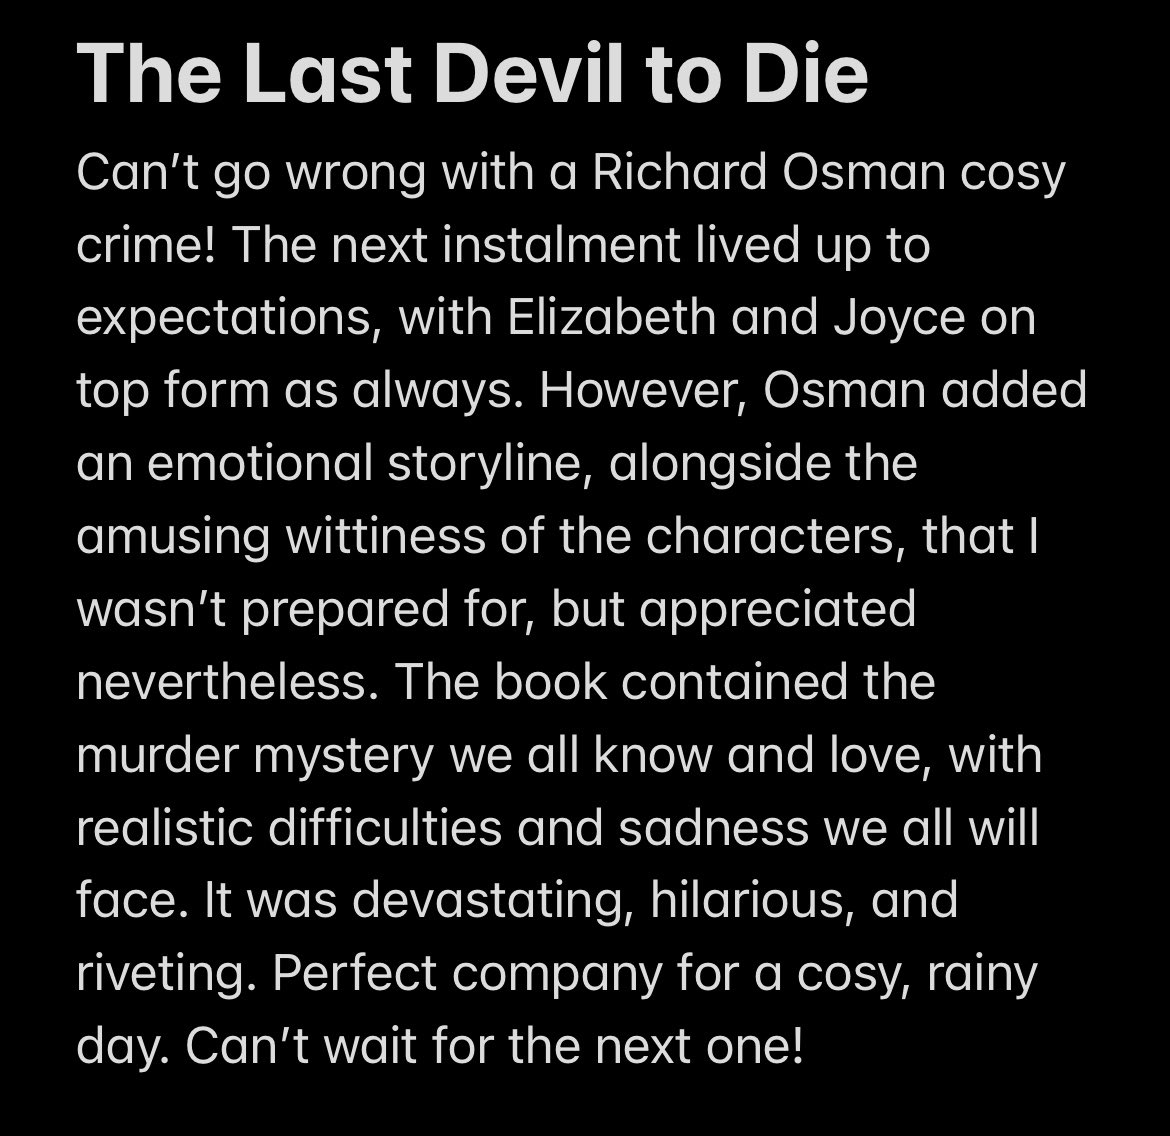 Amusing, devastating, and exciting! A series I will always love and I cannot wait for the next instalment of Elizabeth and Joyce- can you name a better duo? @richardosman @PenguinUKBooks @VikingBooksUK #TheLastDevilToDie